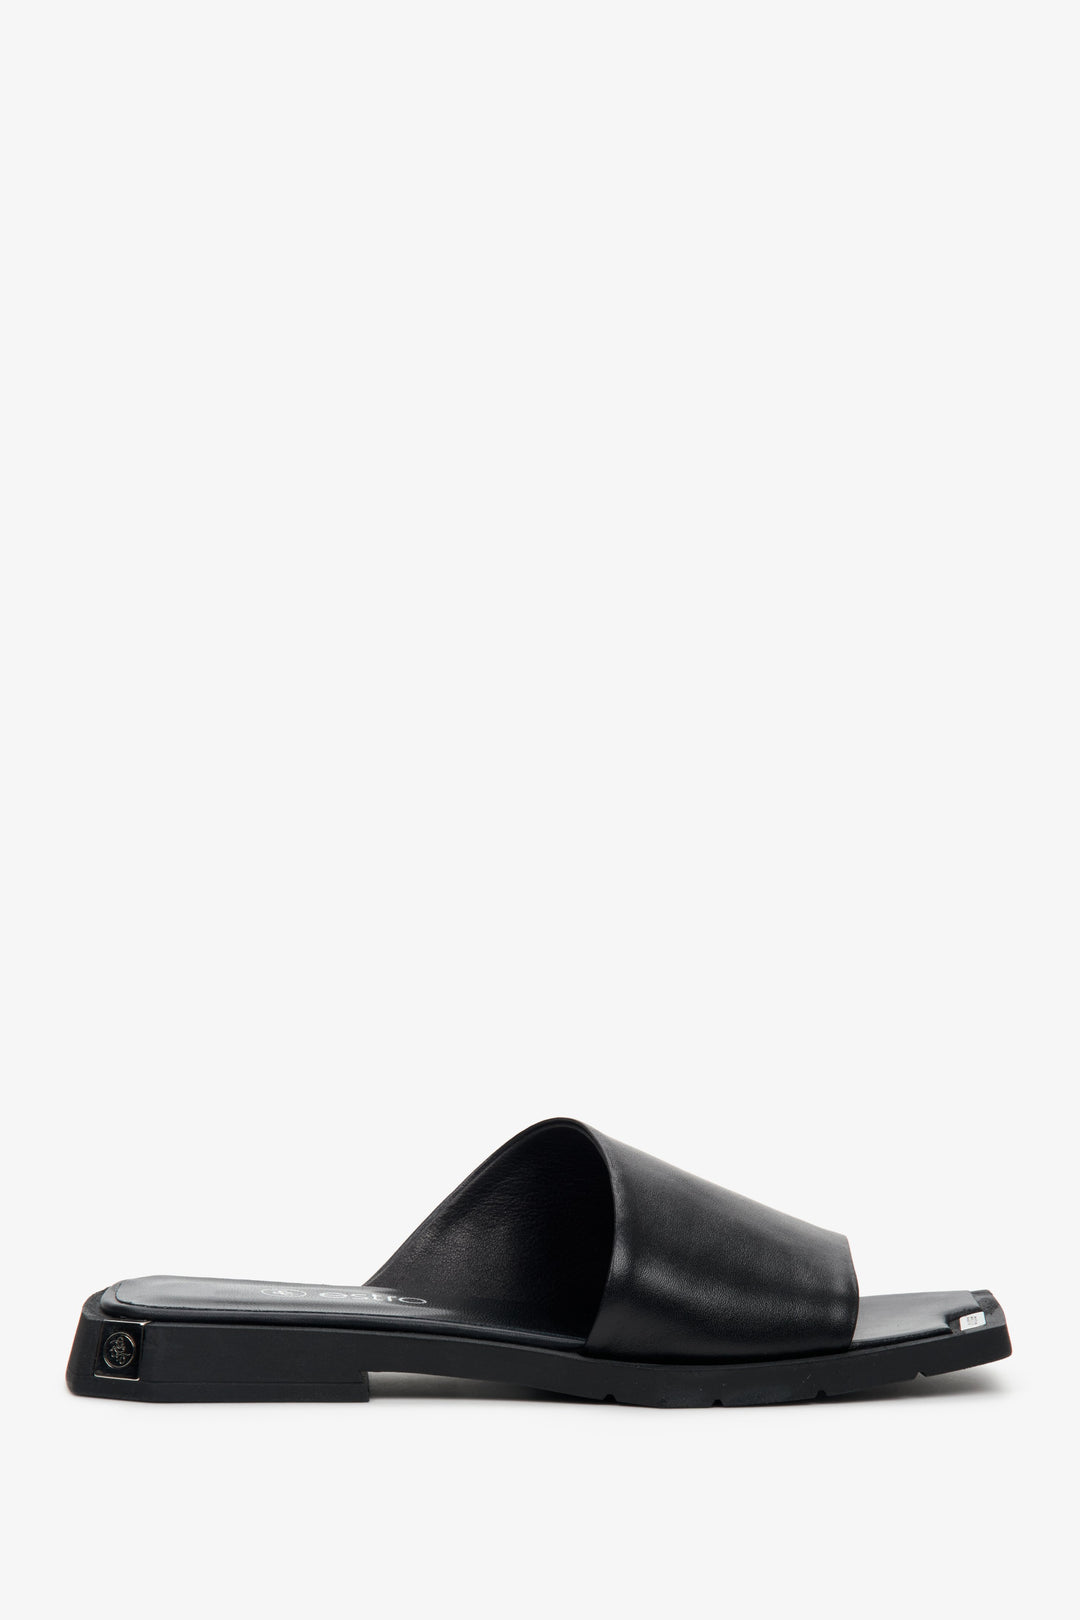 Women's flat mules for summer in black Estro made of natural leather - presentation of the tip and sideline of the shoes.